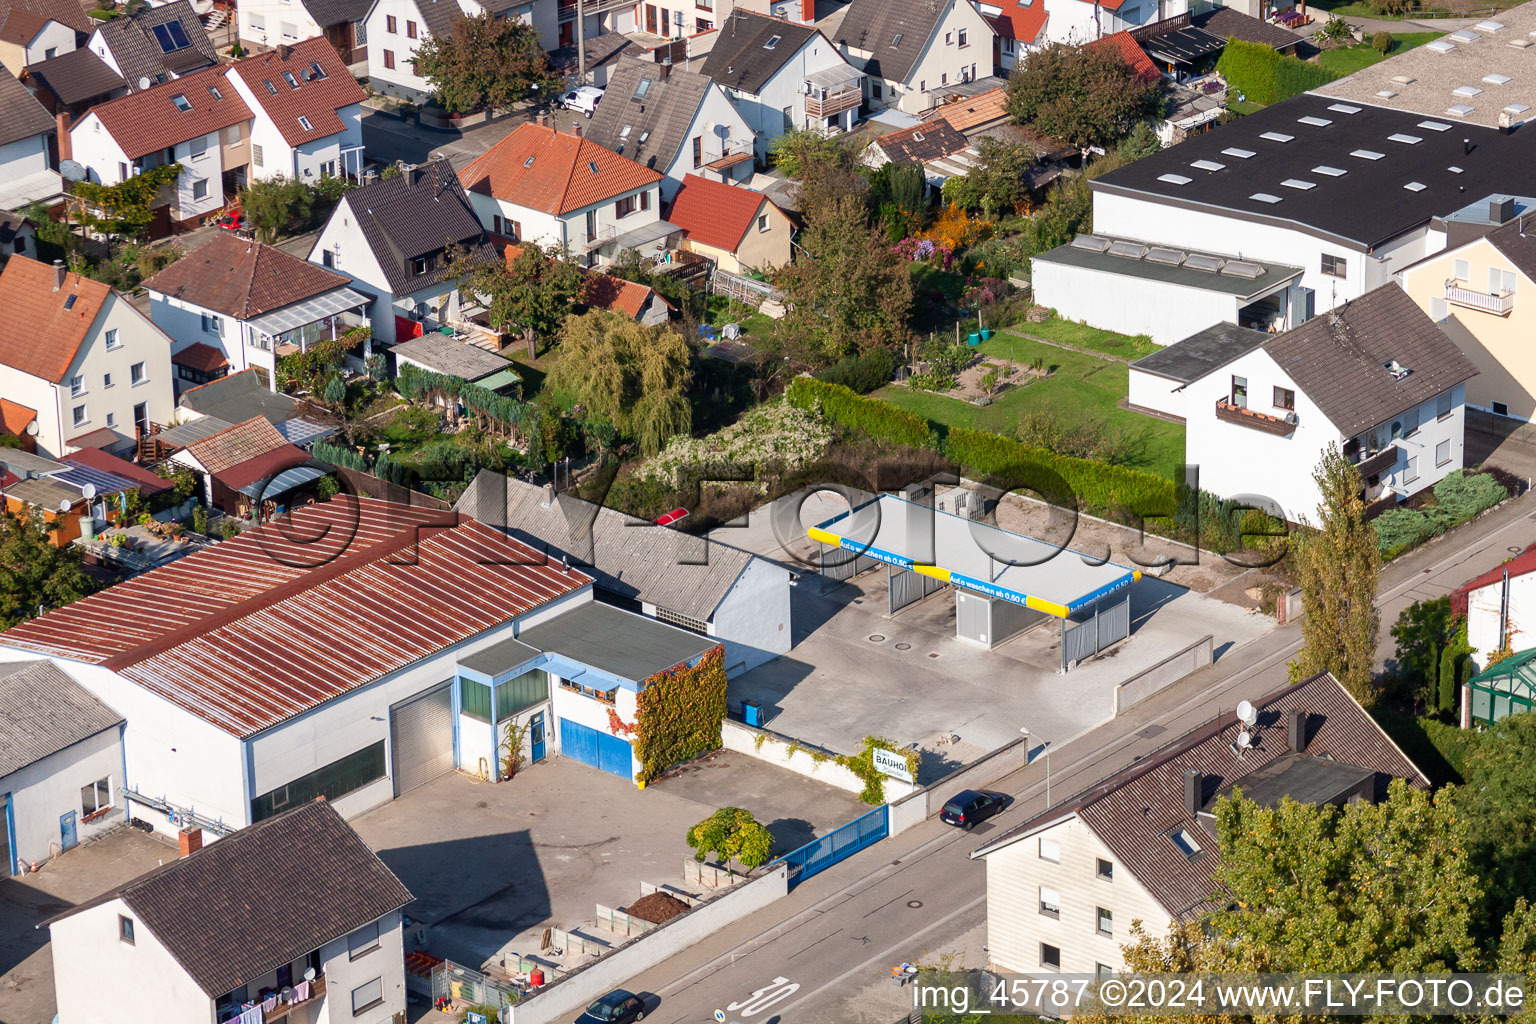 Oblique view of Garden City settlement in Kandel in the state Rhineland-Palatinate, Germany